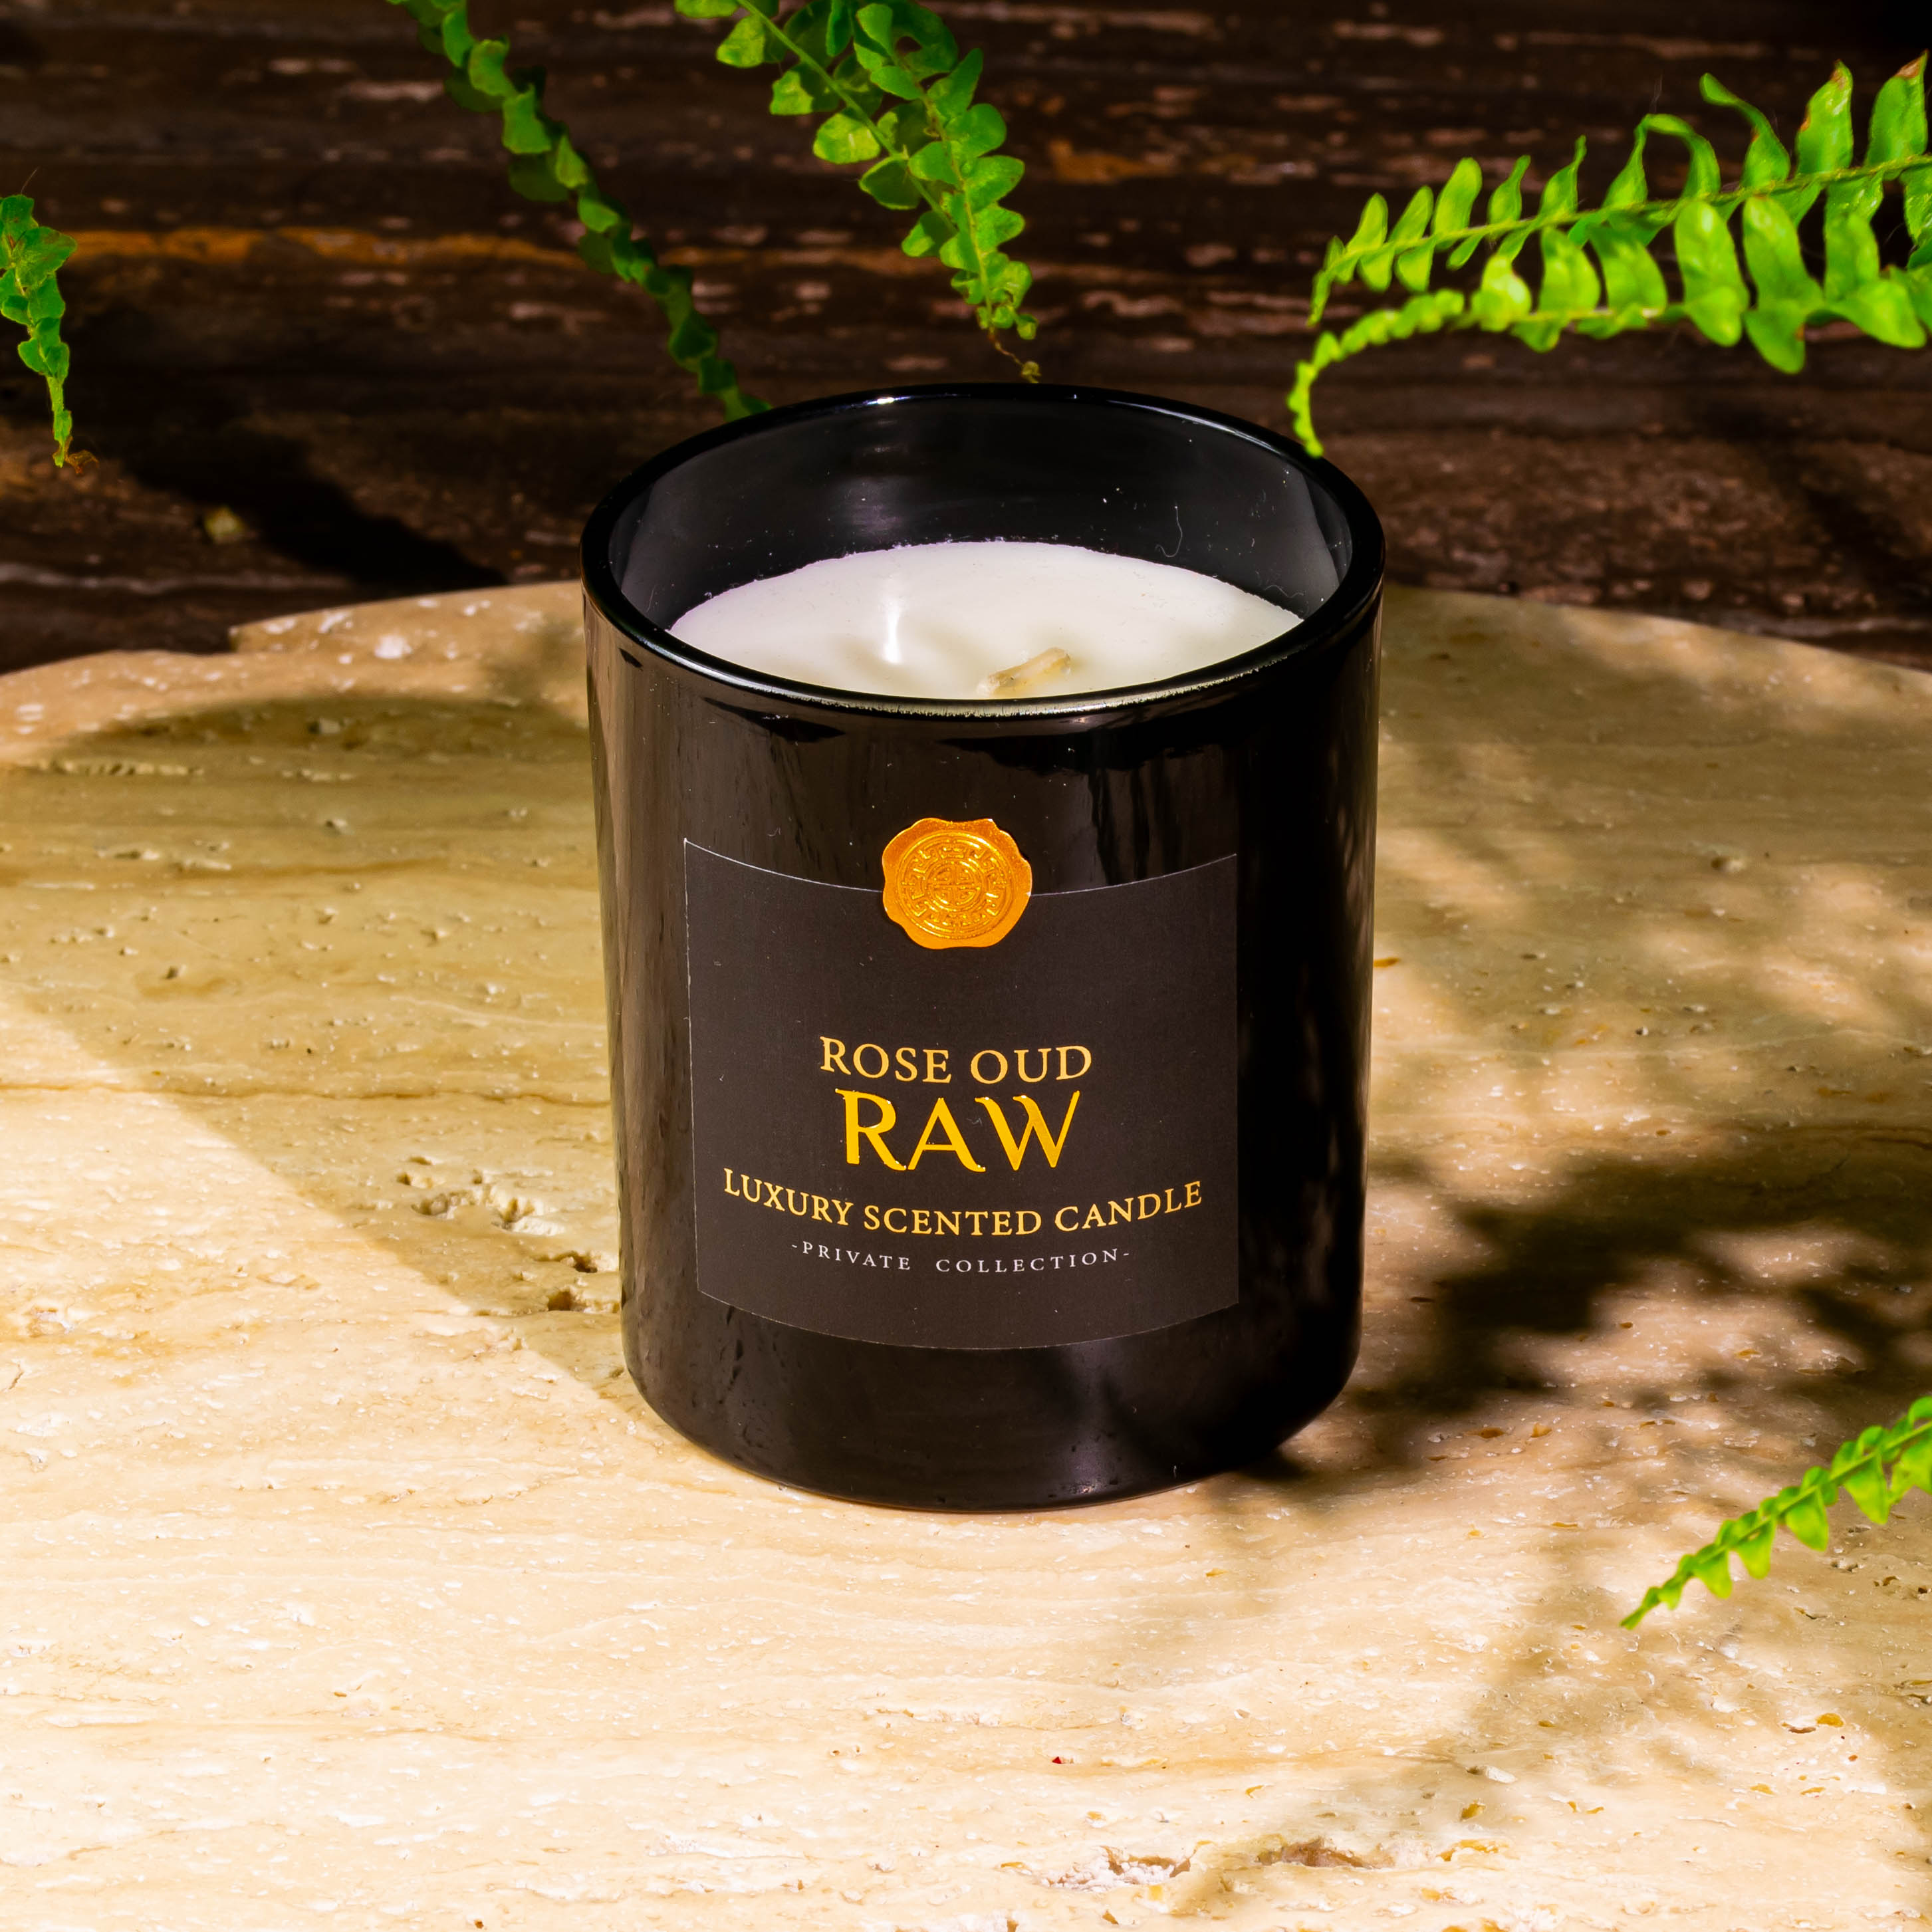 Premium Aromatherapy Soy Wax Gift Candle in Rose Oudh for Focus & Meditation